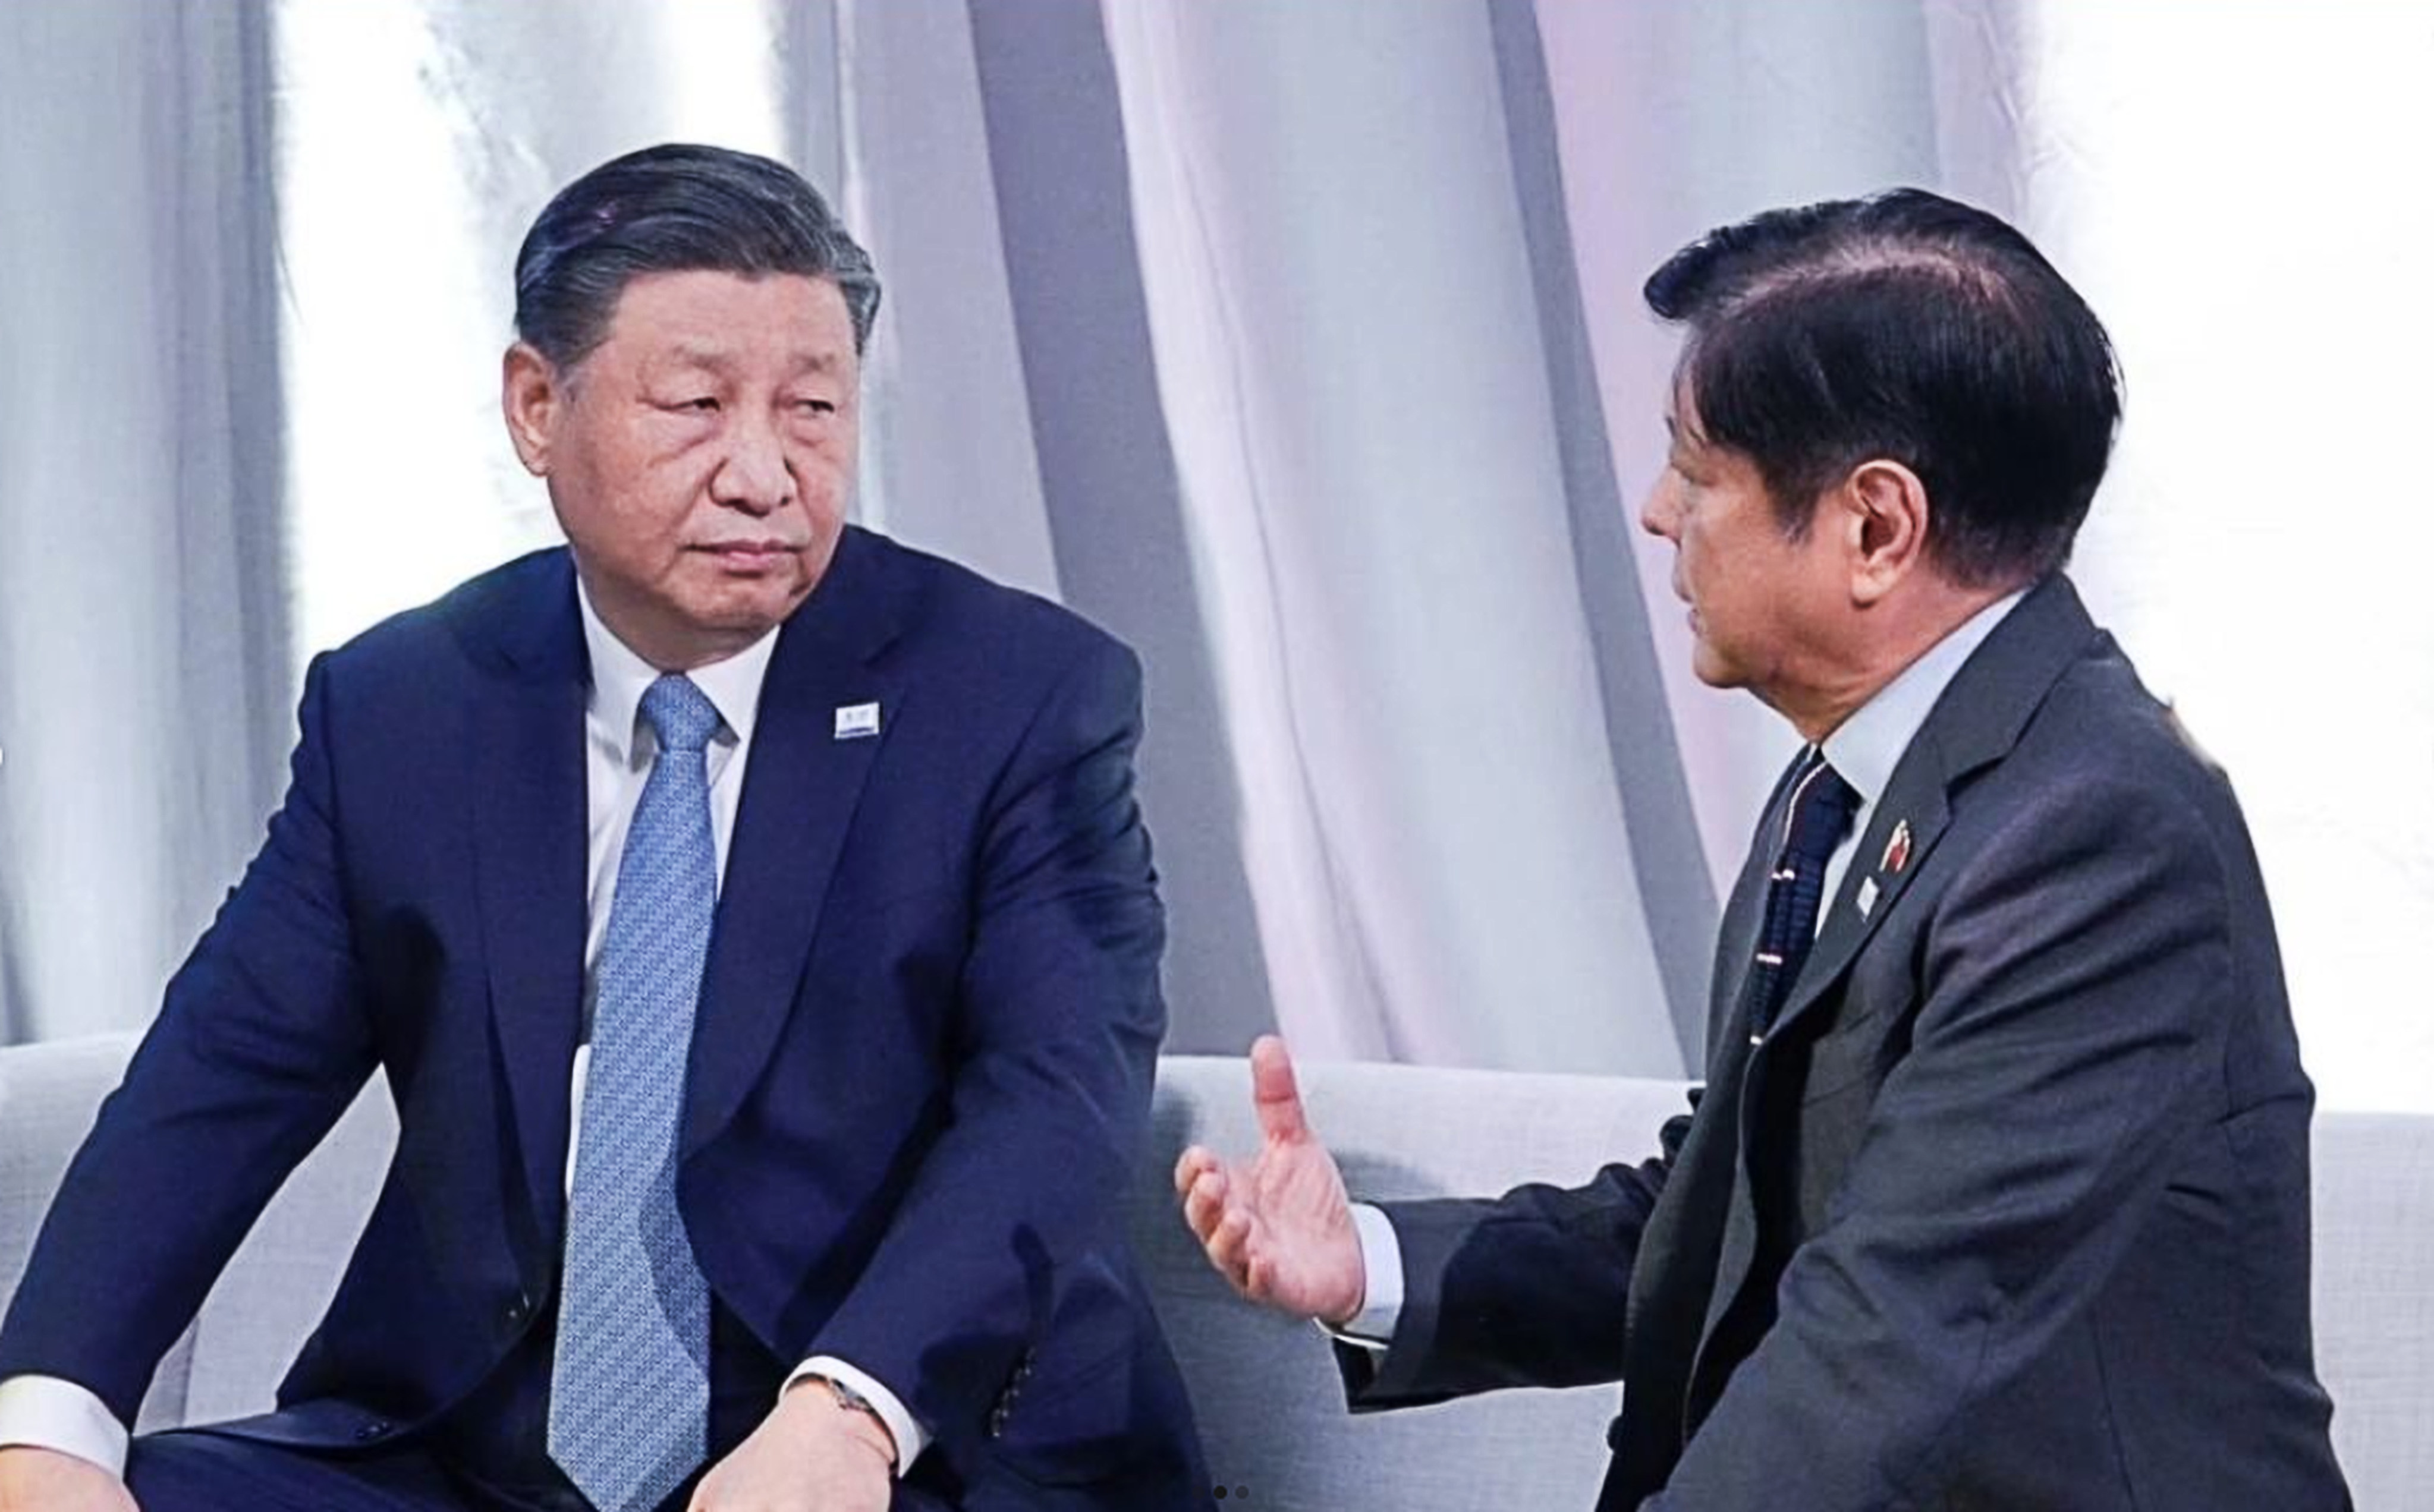 Philippine President Ferninand Marcos Jnr meets Chinese counterpart Xi Jinping on the Apec sidelines in San Francisco on Friday. Photo: Instagram/ @bongbongmarcos